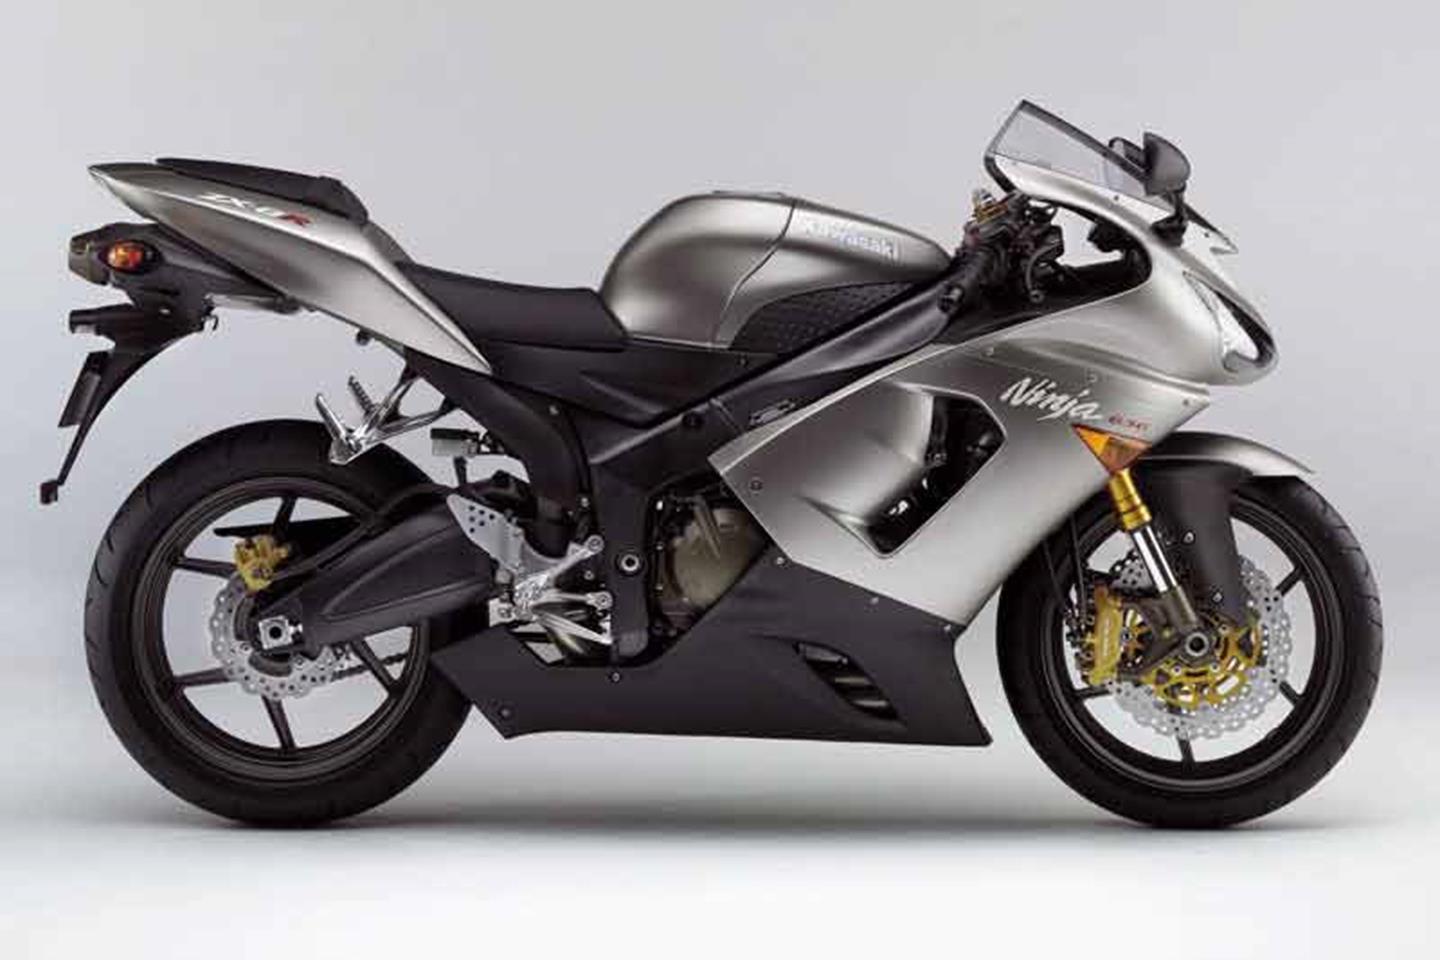 KAWASAKI ZX-6R (2005-2006) Review | Speed, Specs & Prices